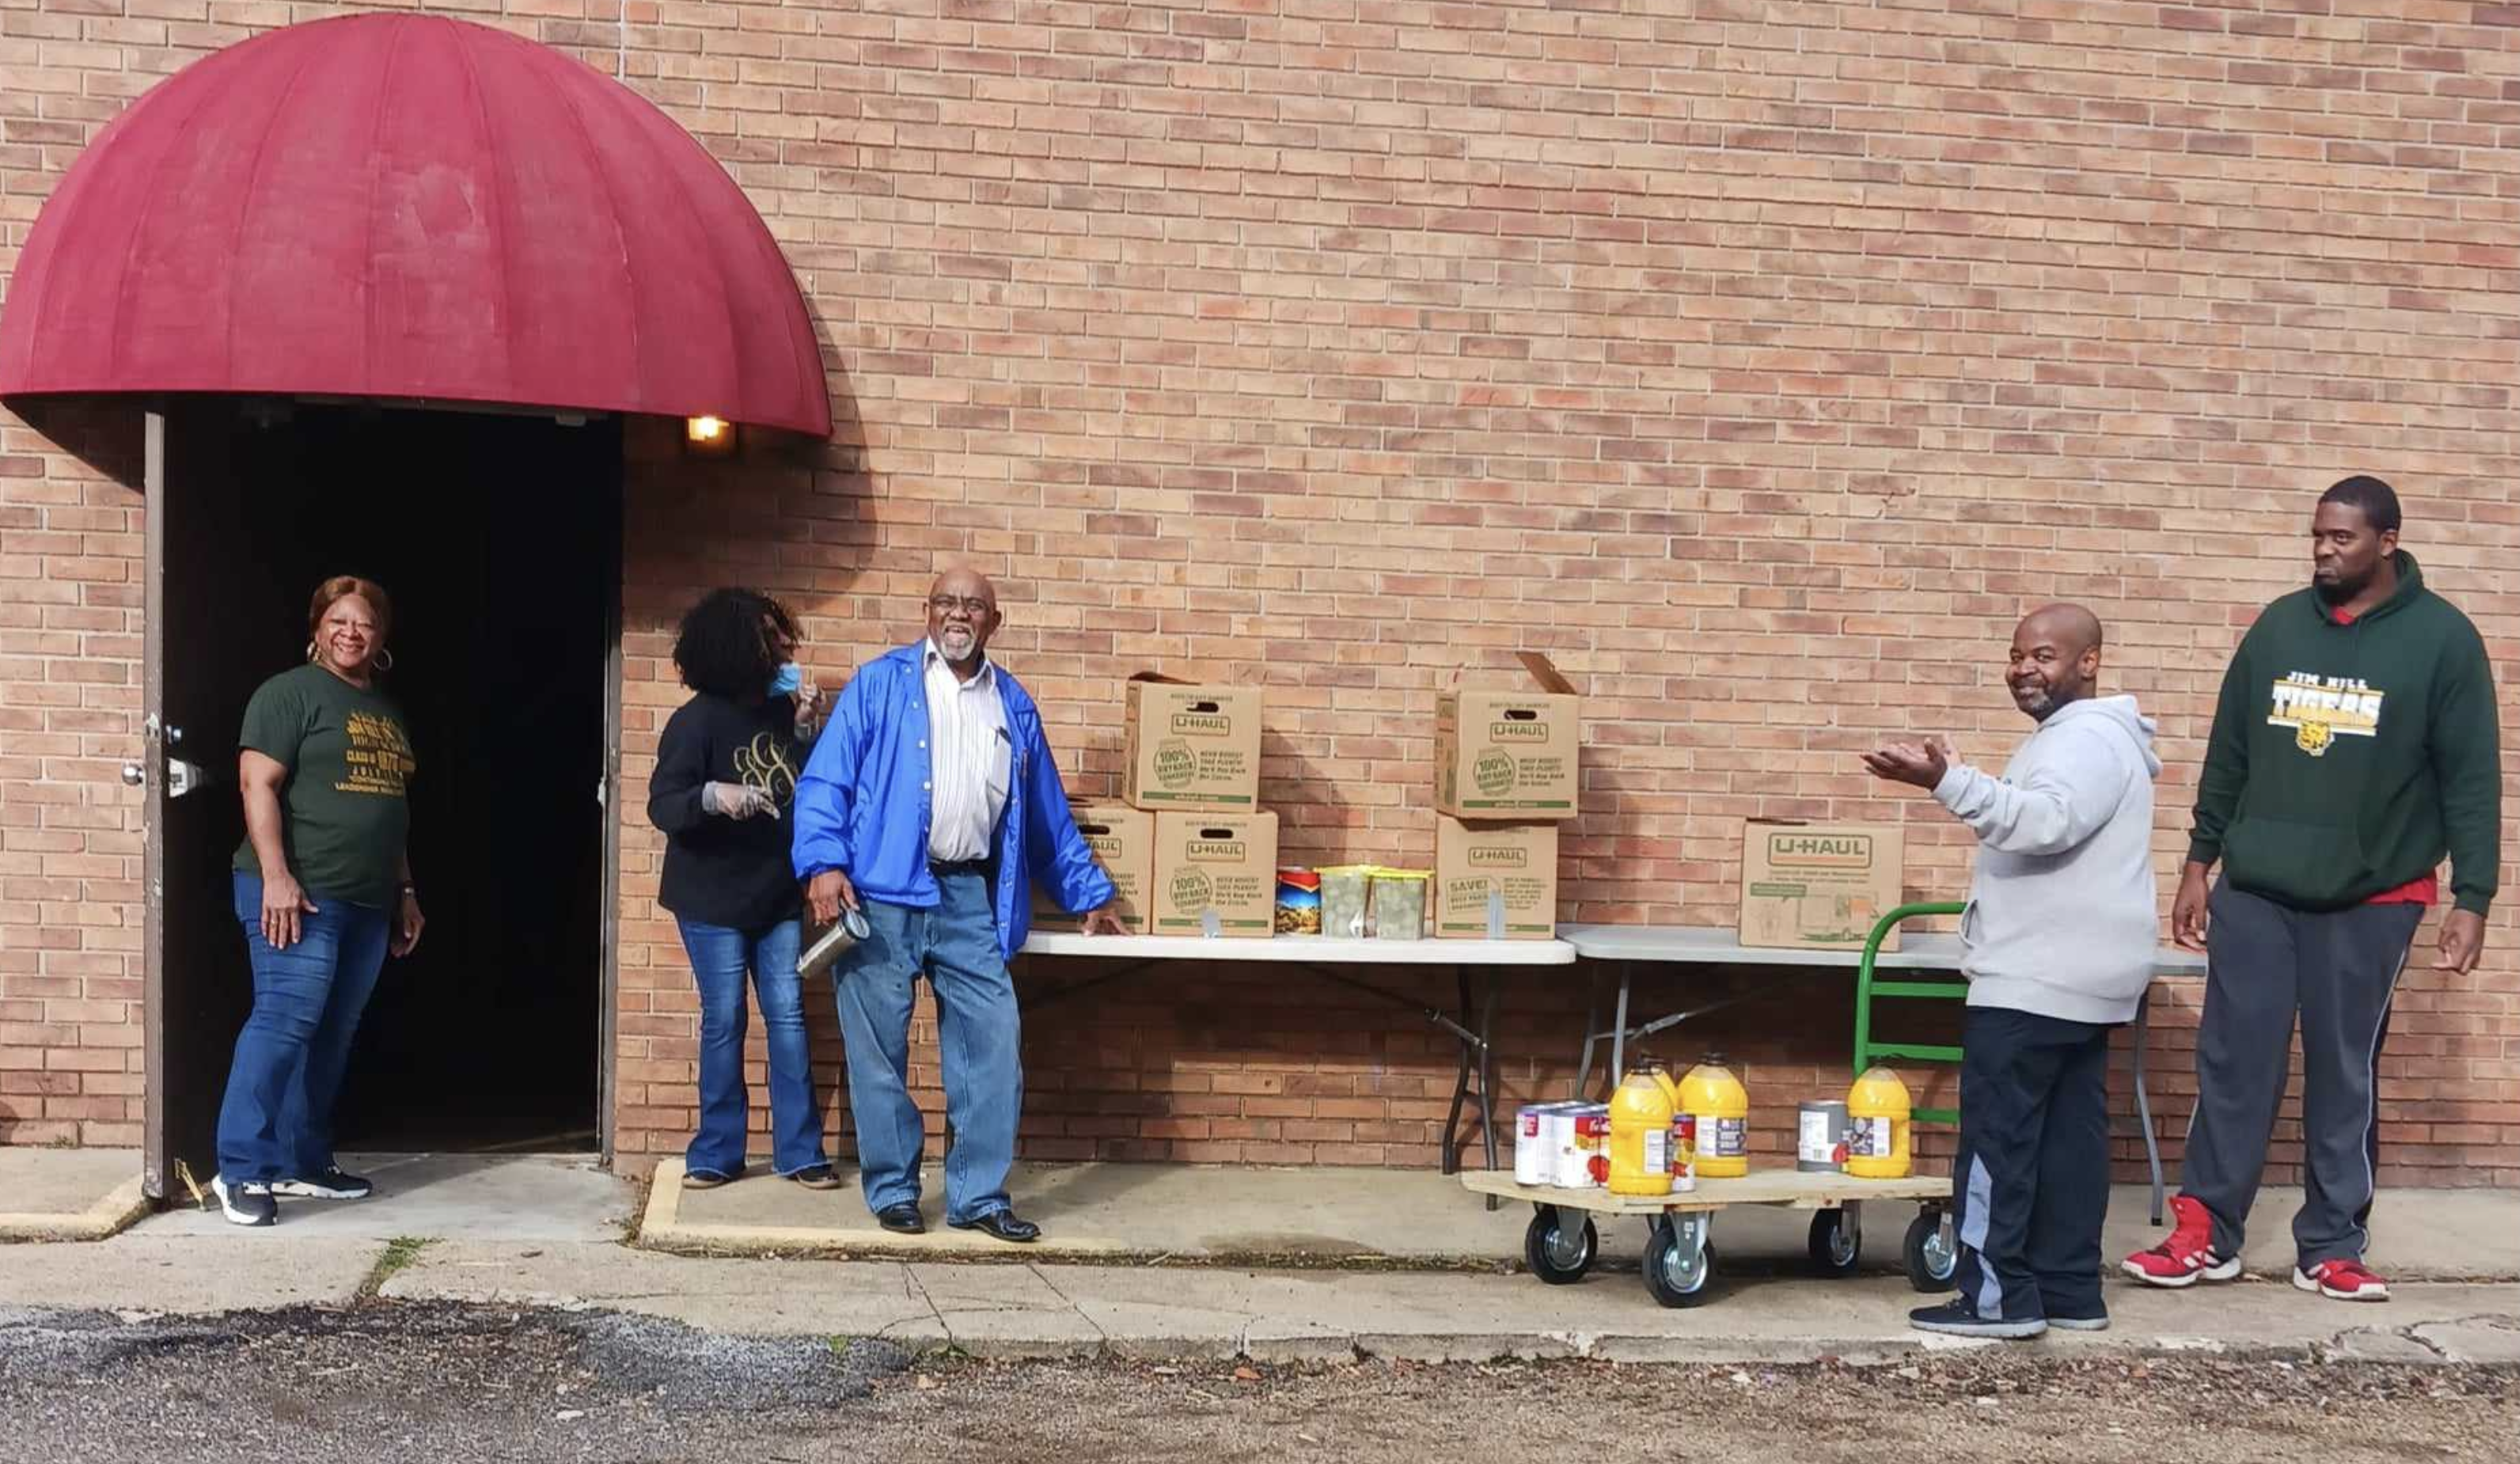 Local churches and organizations are pipelines for needed Thanksgiving foods – Food boxes & turkey giveaways,  a must-have for many